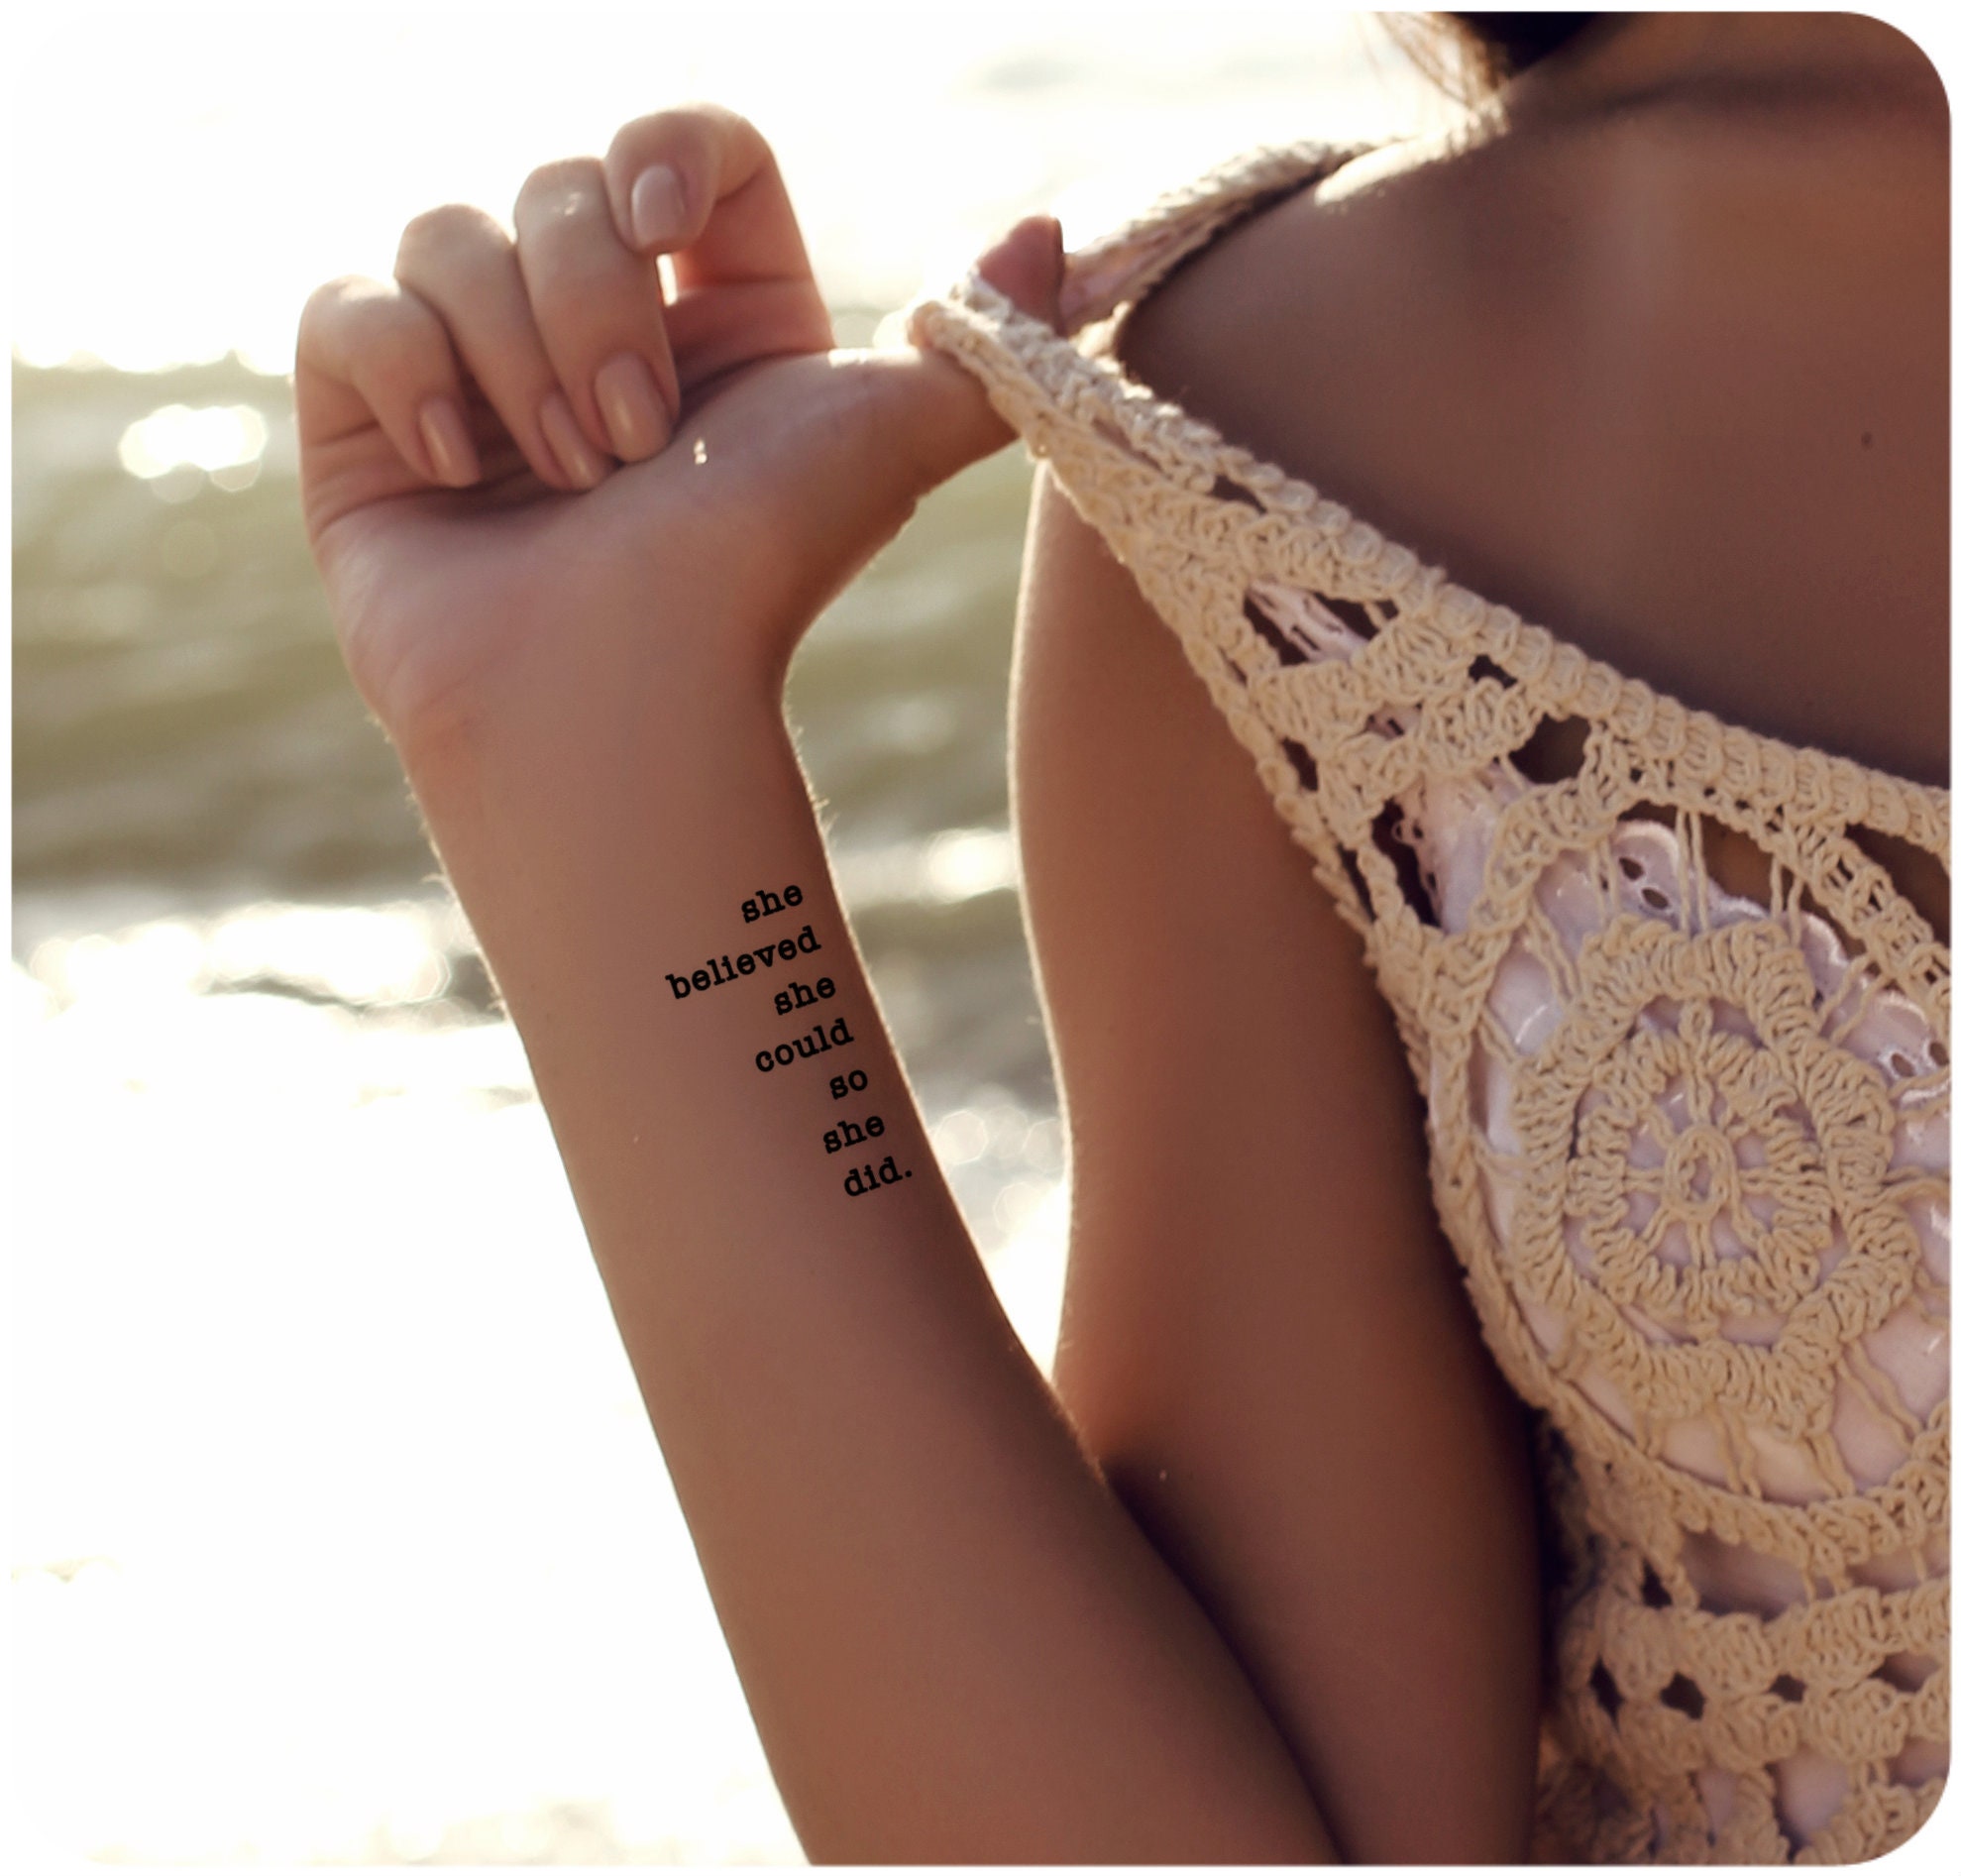 Sexy Tattoos For Women With Meaning